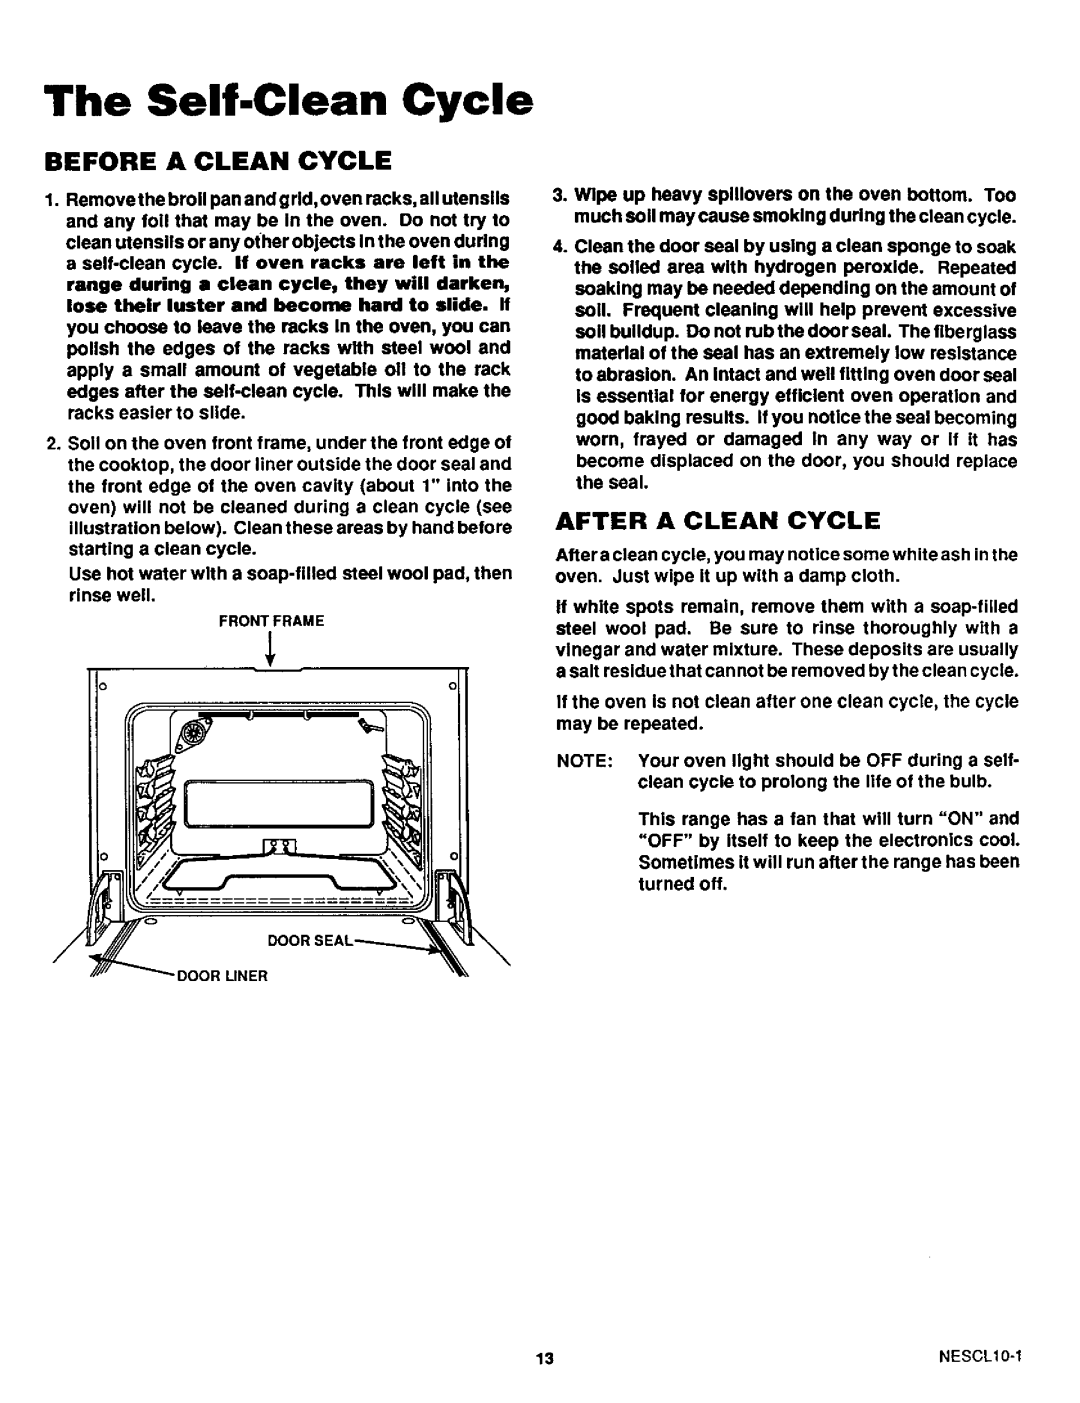 Sears 46521, 46525, 46520 warranty The Self-CleanCycle, Before A Clean Cycle, After A Clean Cycle 